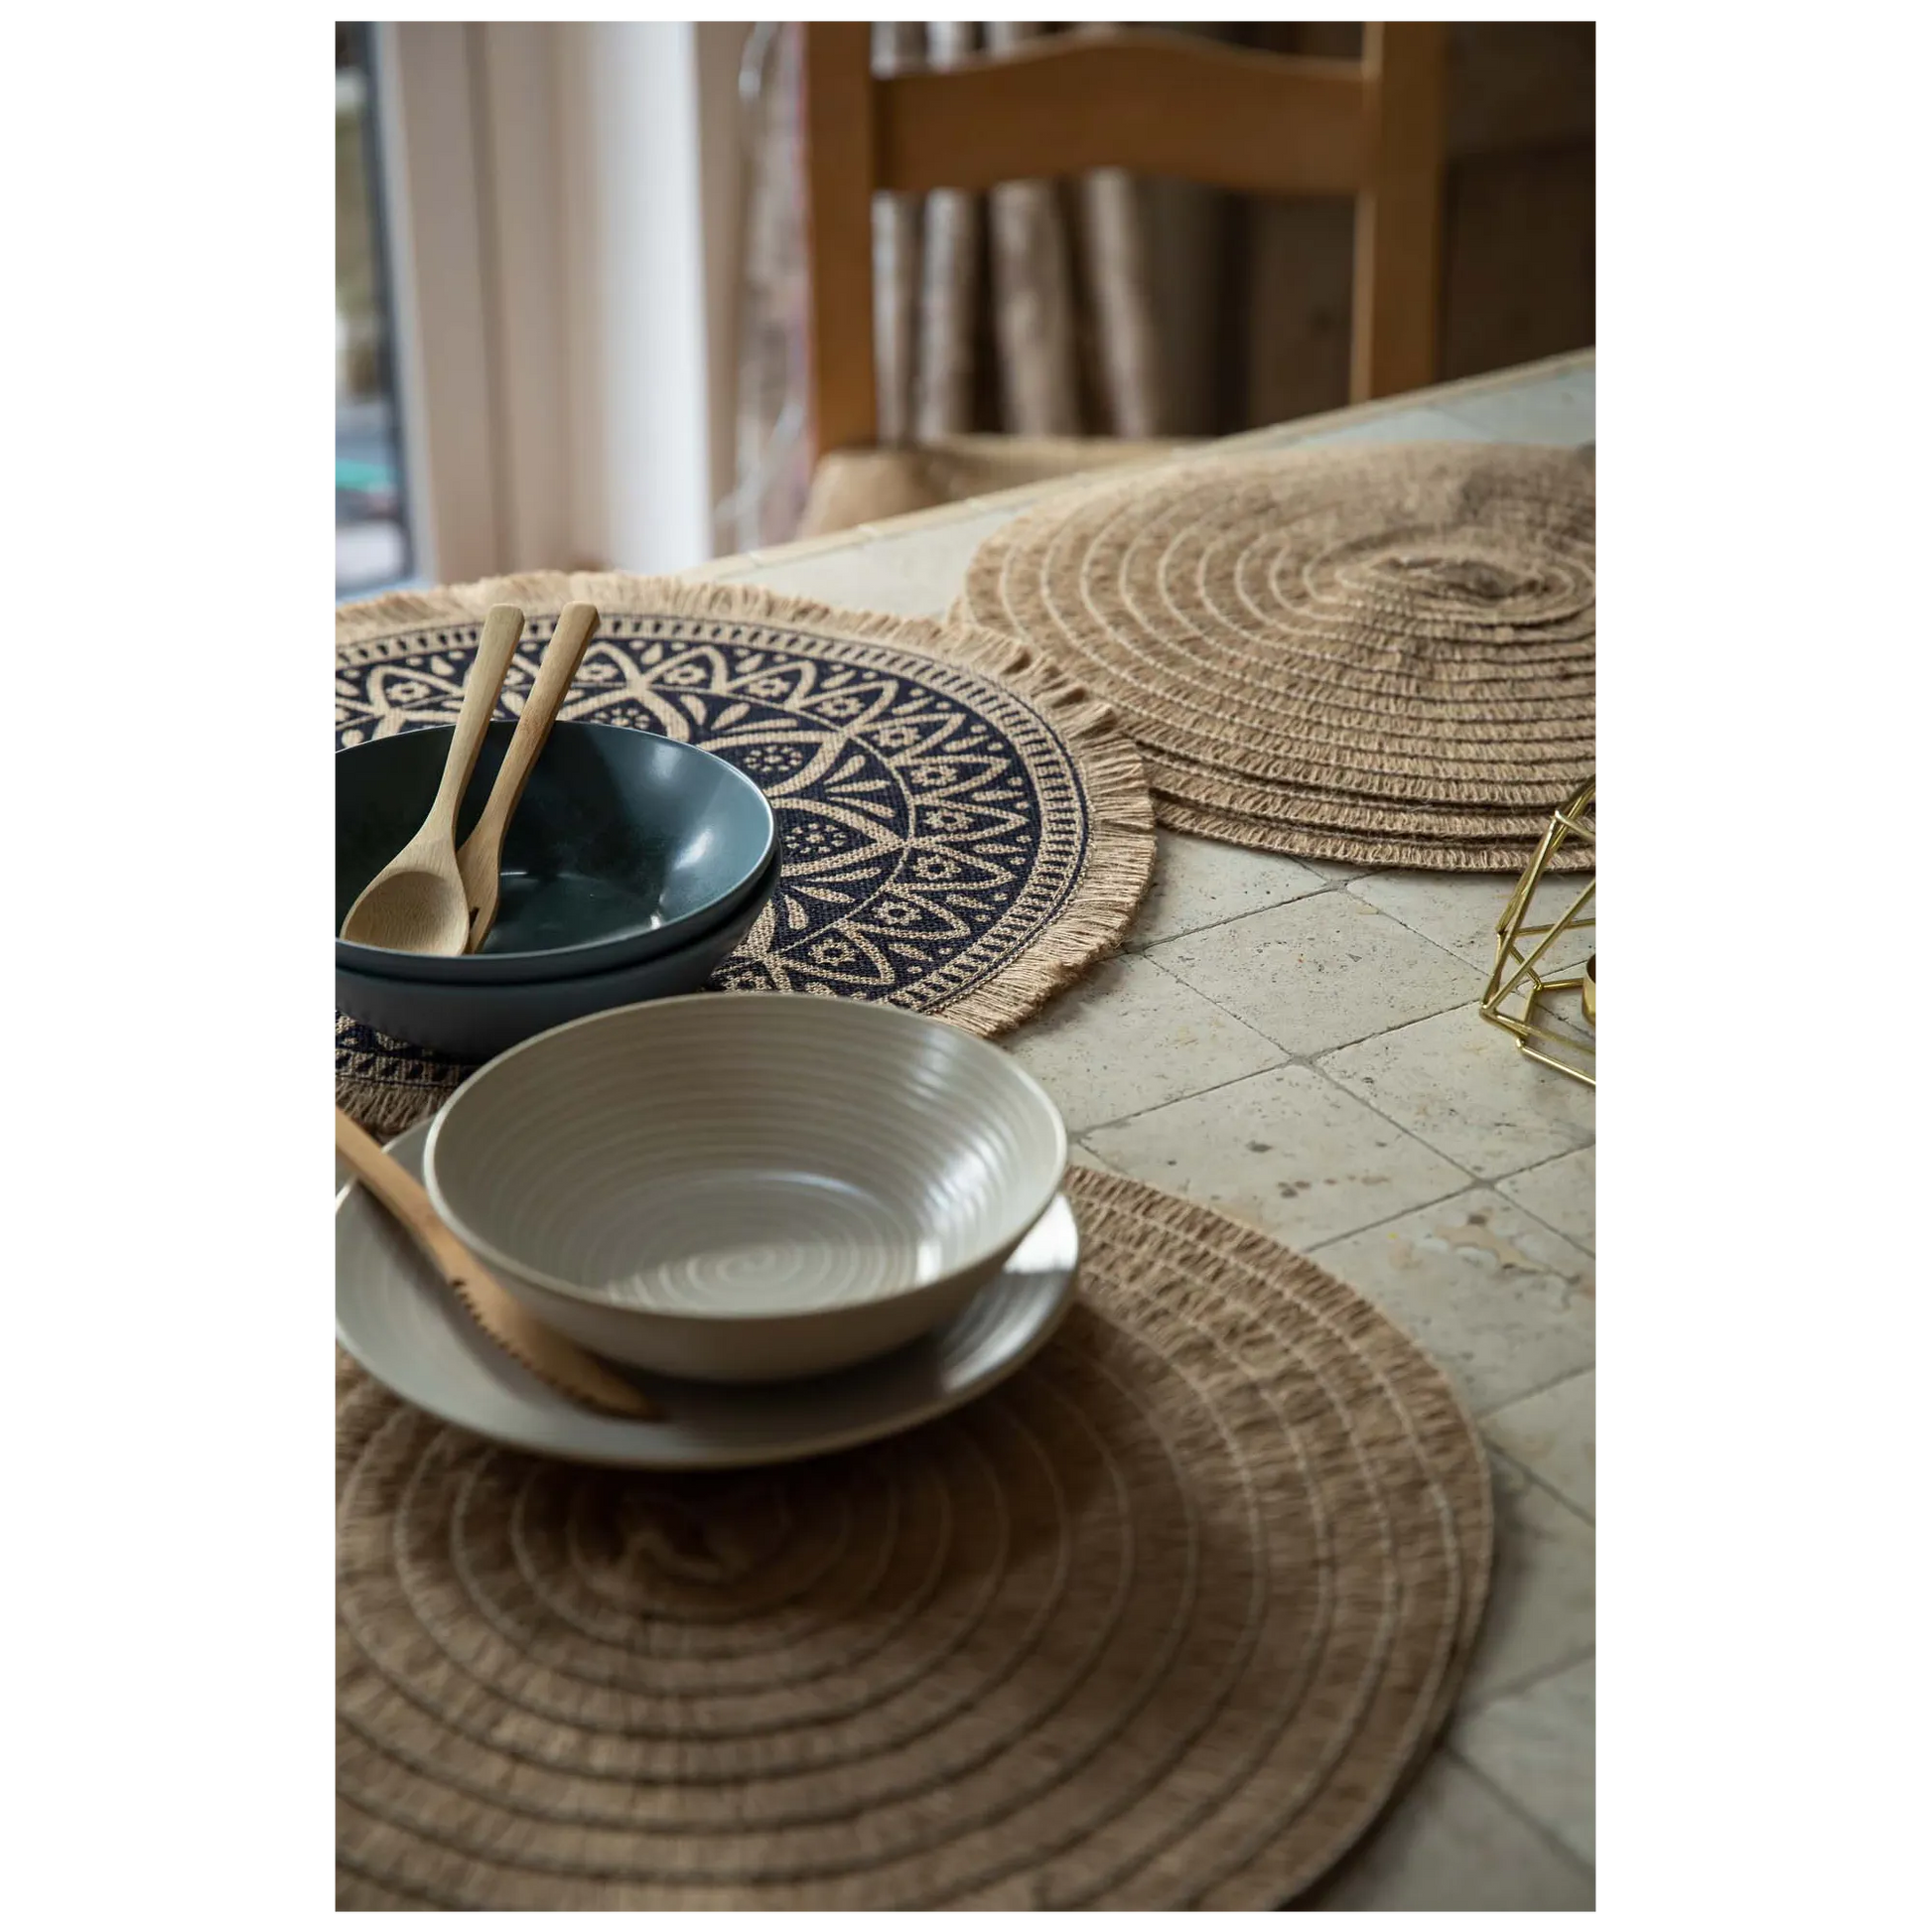 Creative Tops Set of 4 Jute Placemats with Mandala Design, Natural Printed Hessian Round Table Mats, 41cm